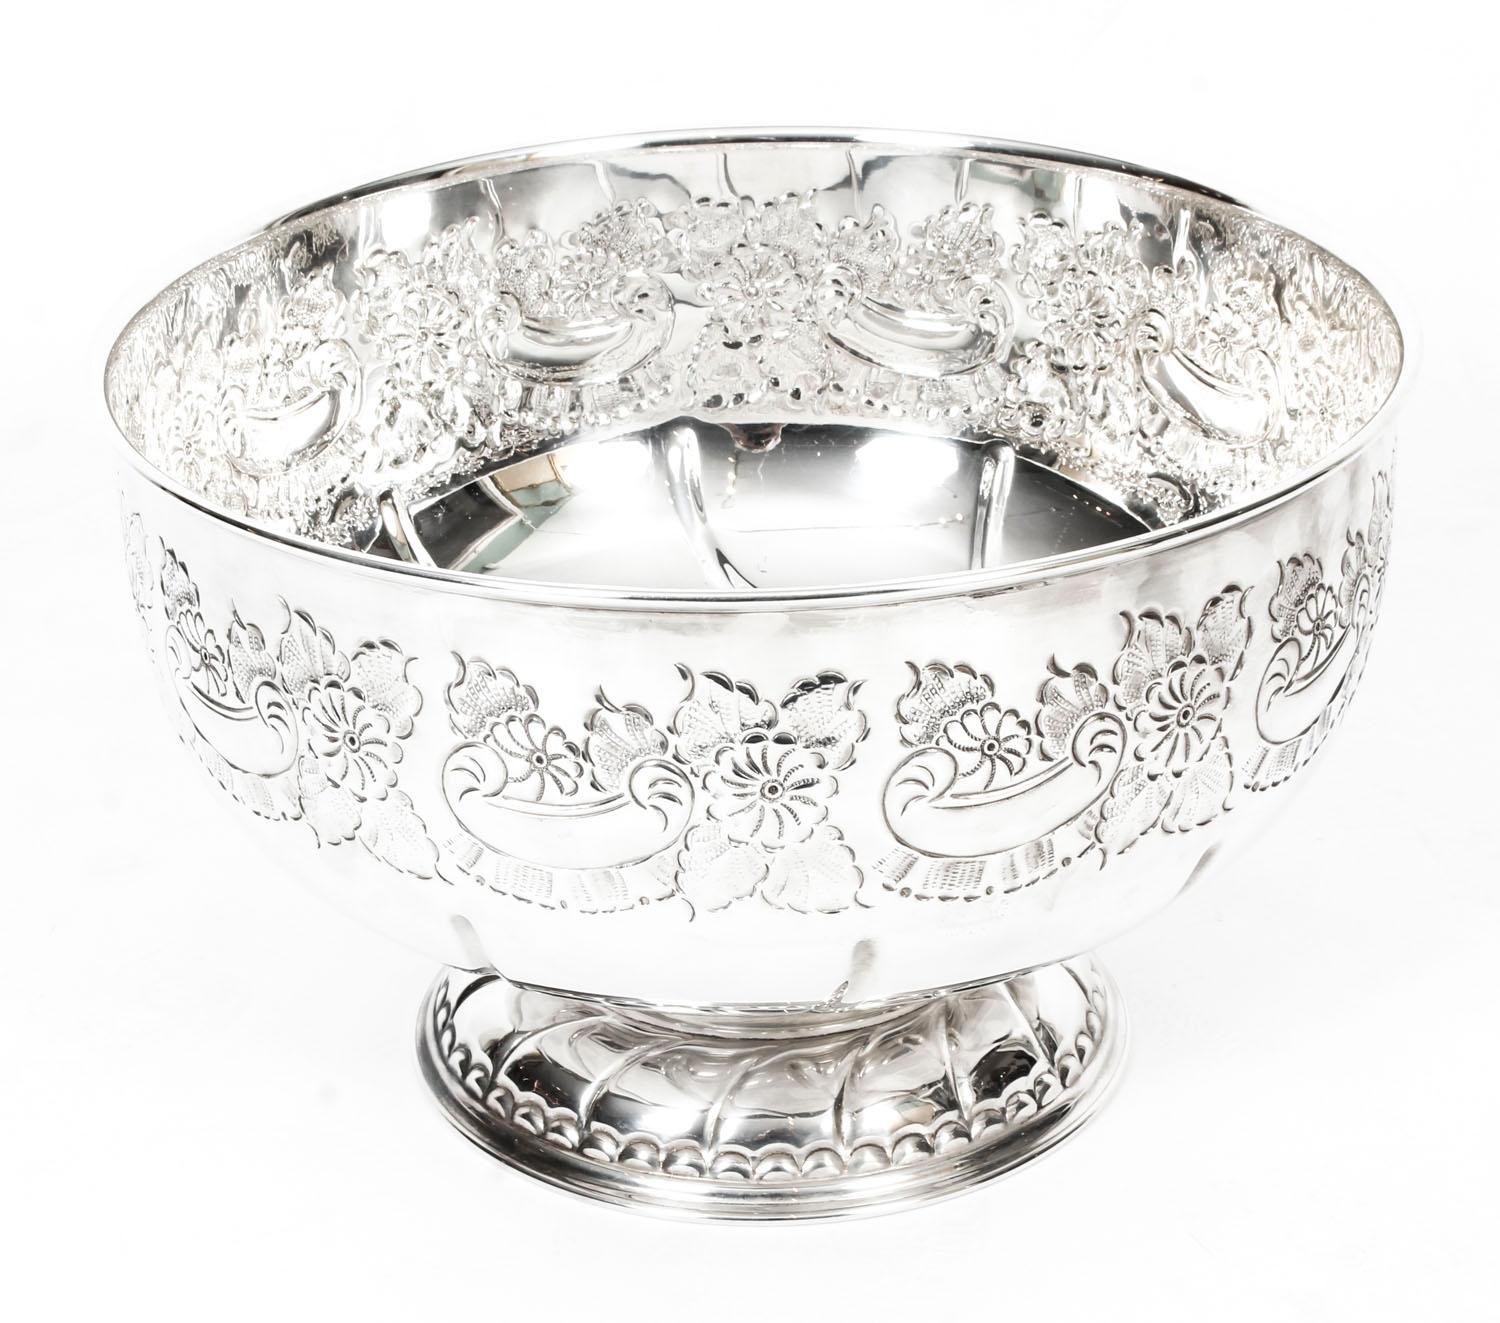 A truly superb vintage large silver plated footed punch bowl set, that include 12 punch cups, by Viners of Sheffield, dating from the mid-20th century.

This highly versatile item features fabulous embossed floral decoration and can also be used